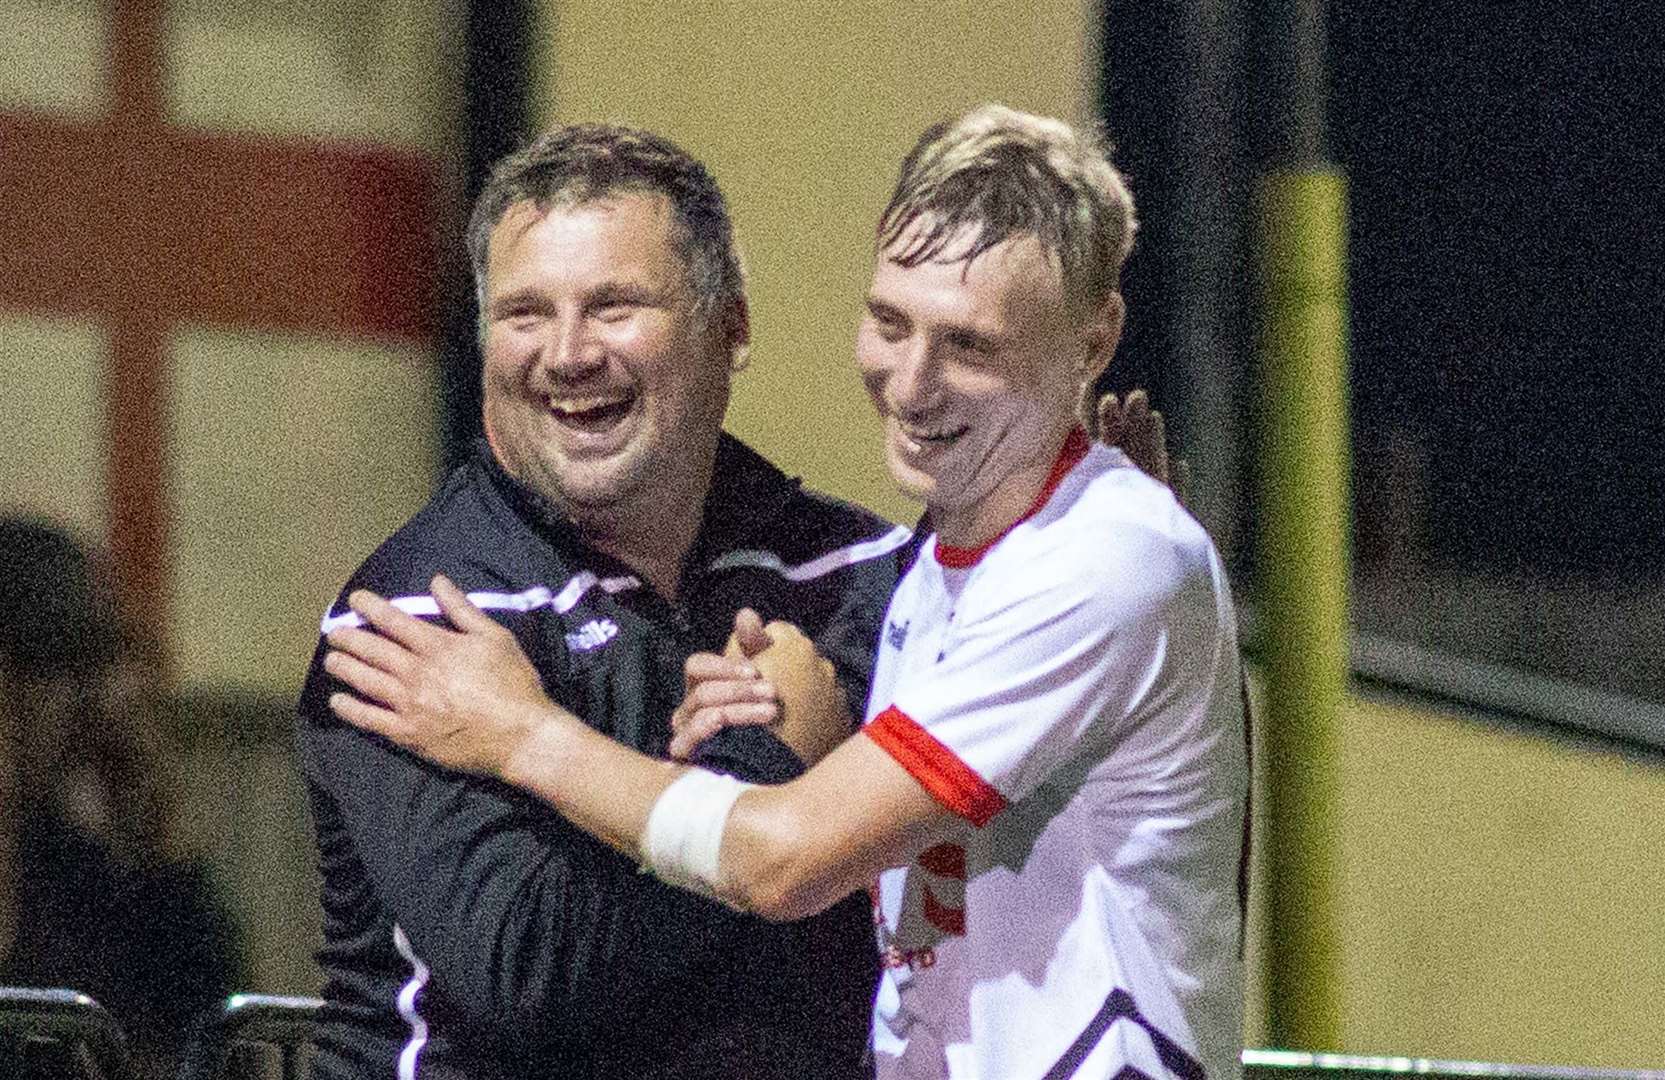 Deal Town manager Steve King, left, celebrates with Ben Chapman during their 3-1 win over Canterbury City last Tuesday. Picture: Paul Willmott